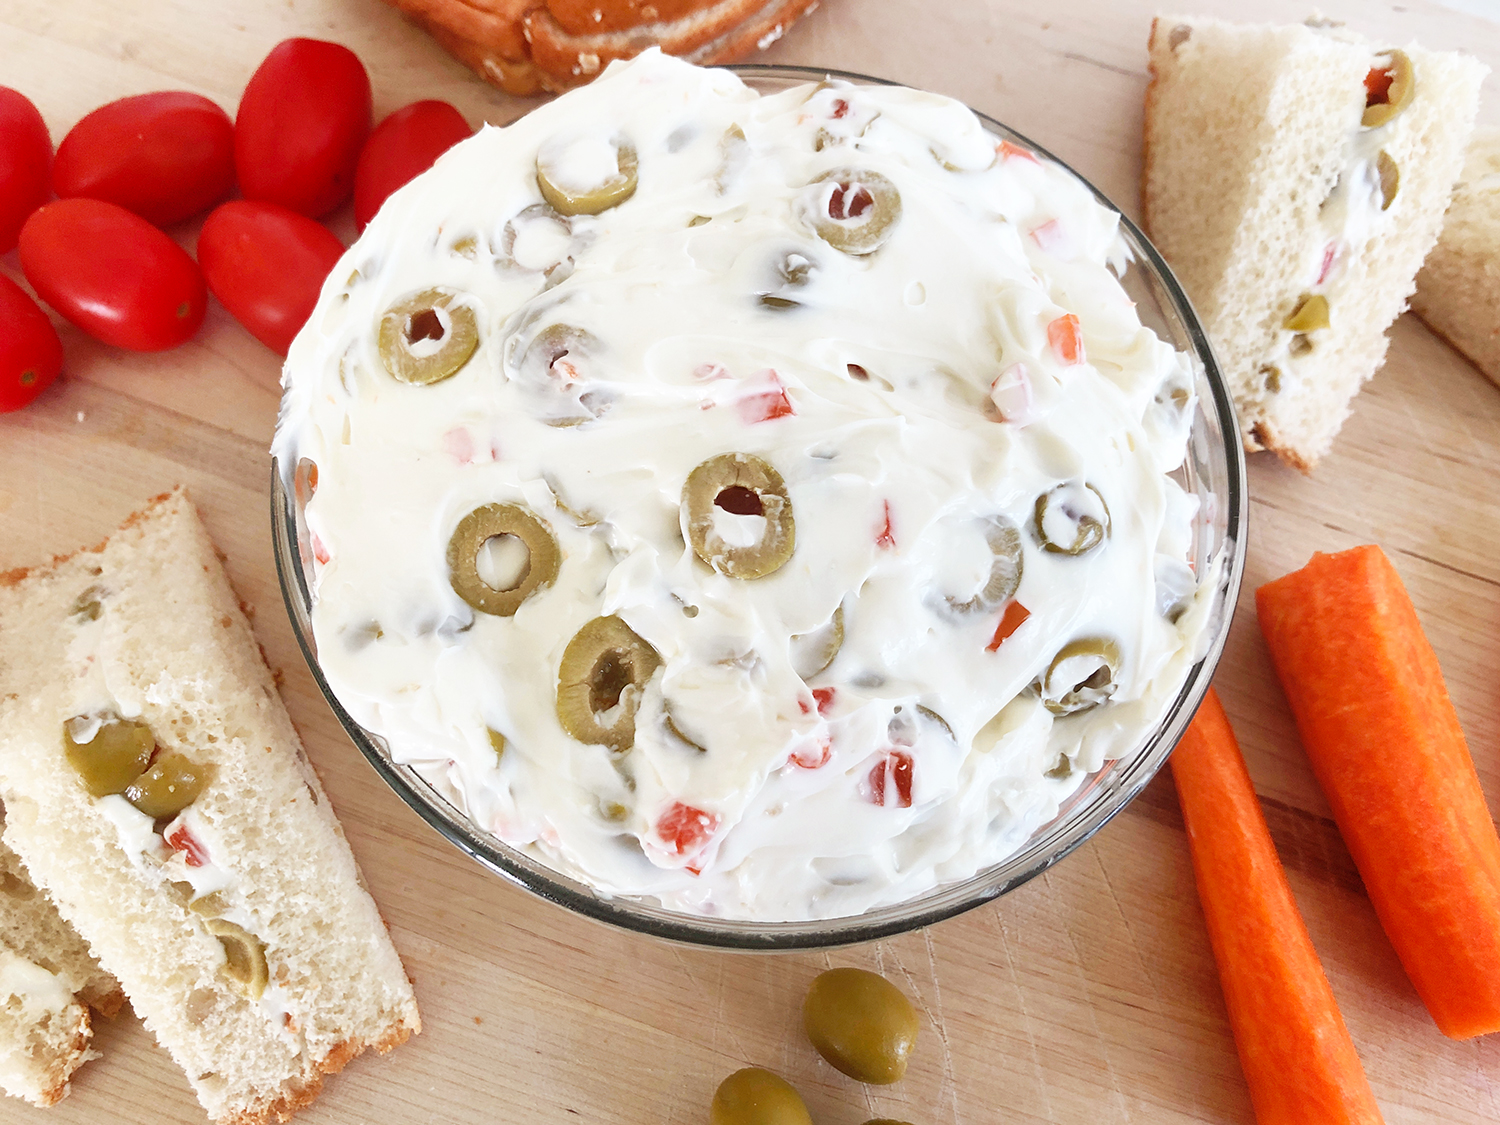 Southern Mom Loves: Savory Cream Cheese & Olive Spread